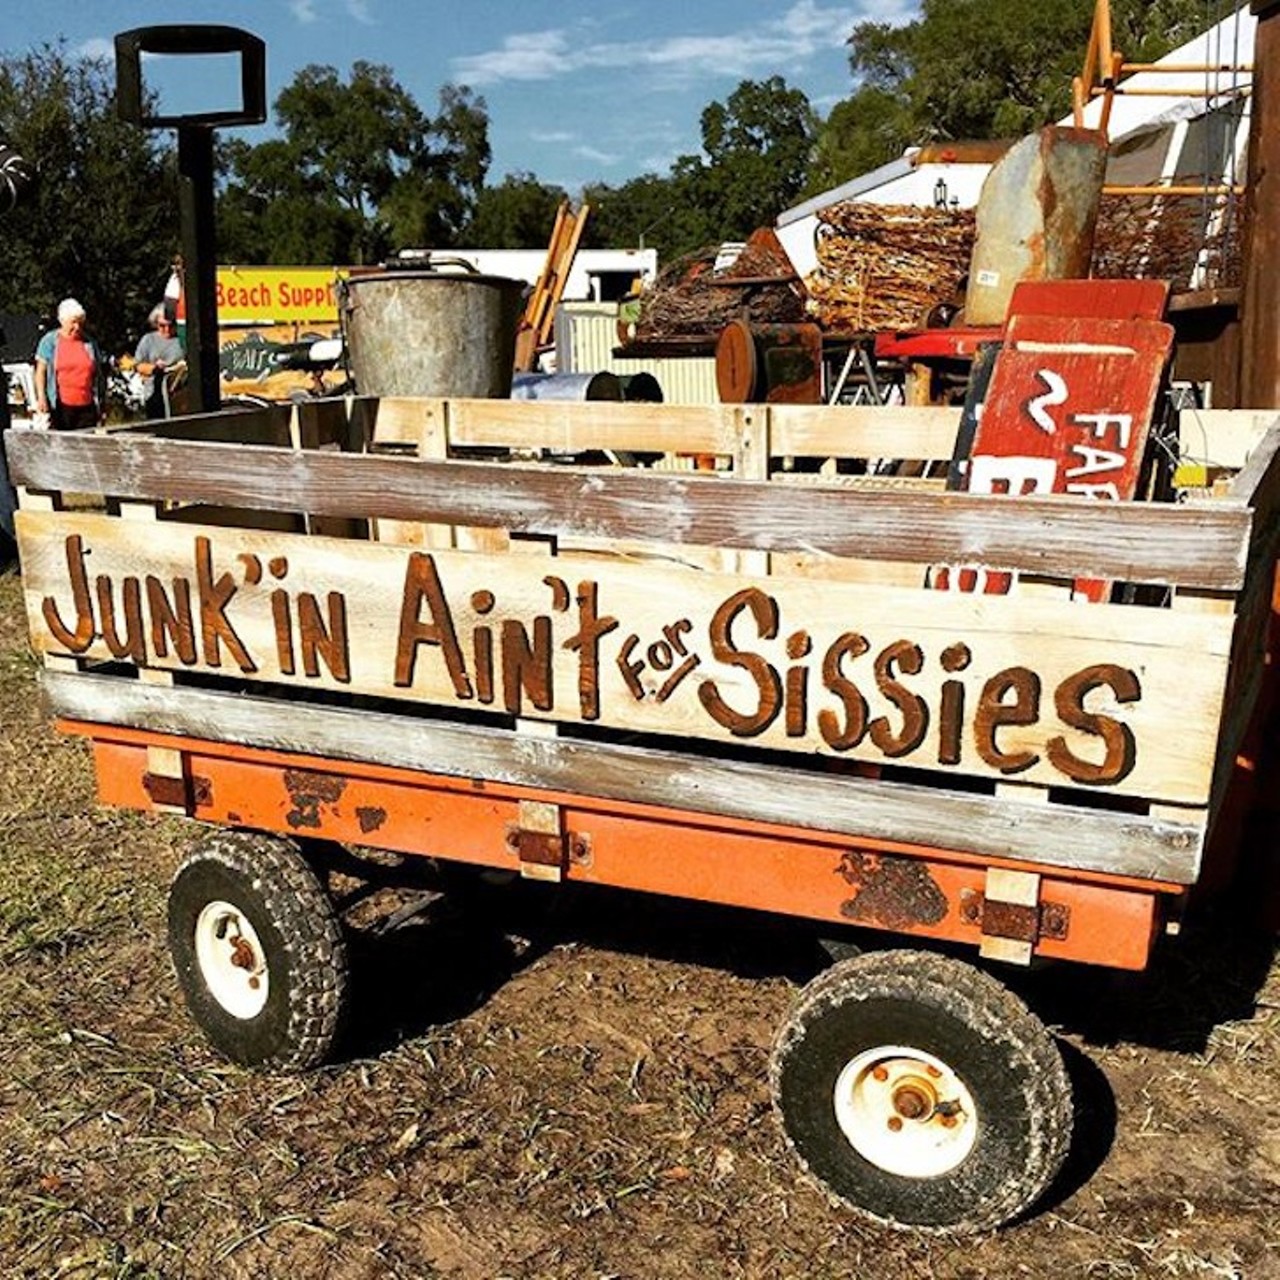 Renninger&#146;s 
20651 US-441, Mount Dora | (352) 383-8393
There&#146;s no better way to spend an afternoon than strolling through Renninger&#146;s open air markets, where oddities and funky trinkets are the speciality. 
Photo via aroundmountdora/Instagram